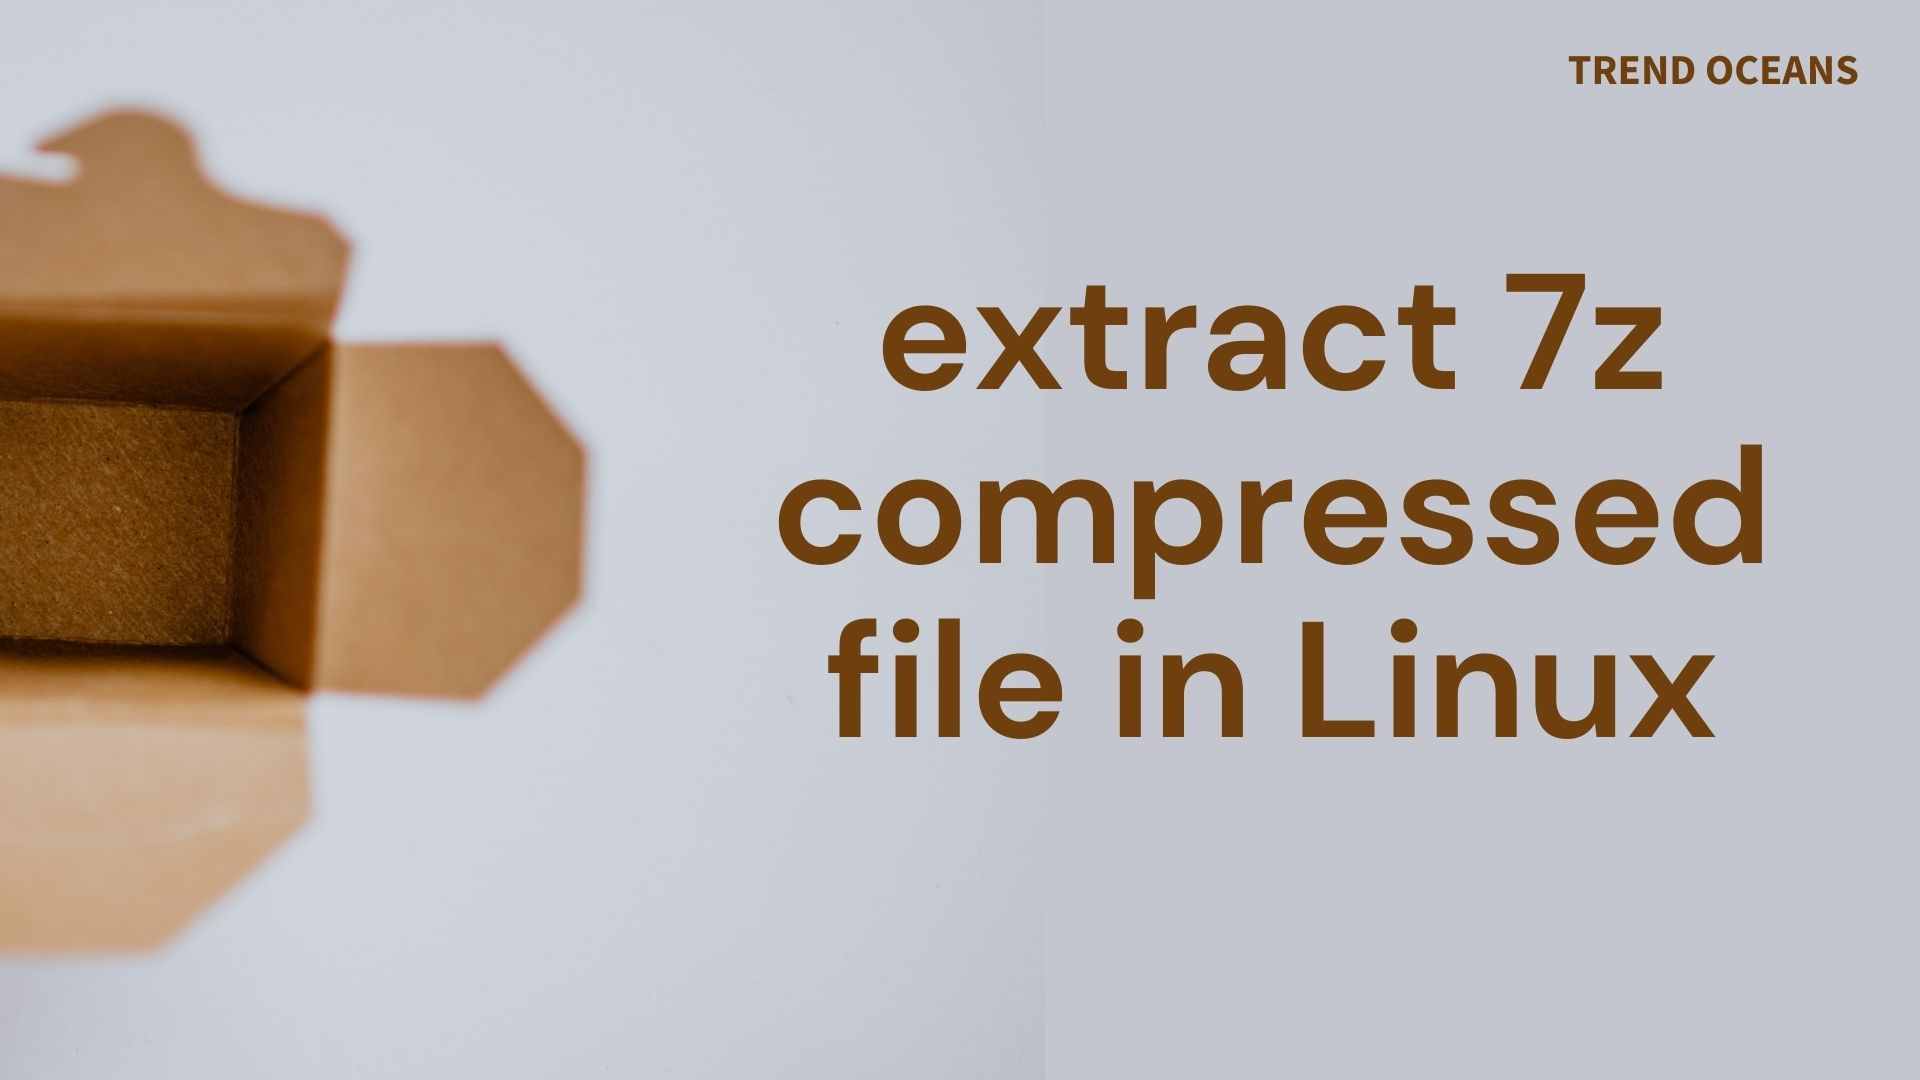 extract 7z compressed file in Linux